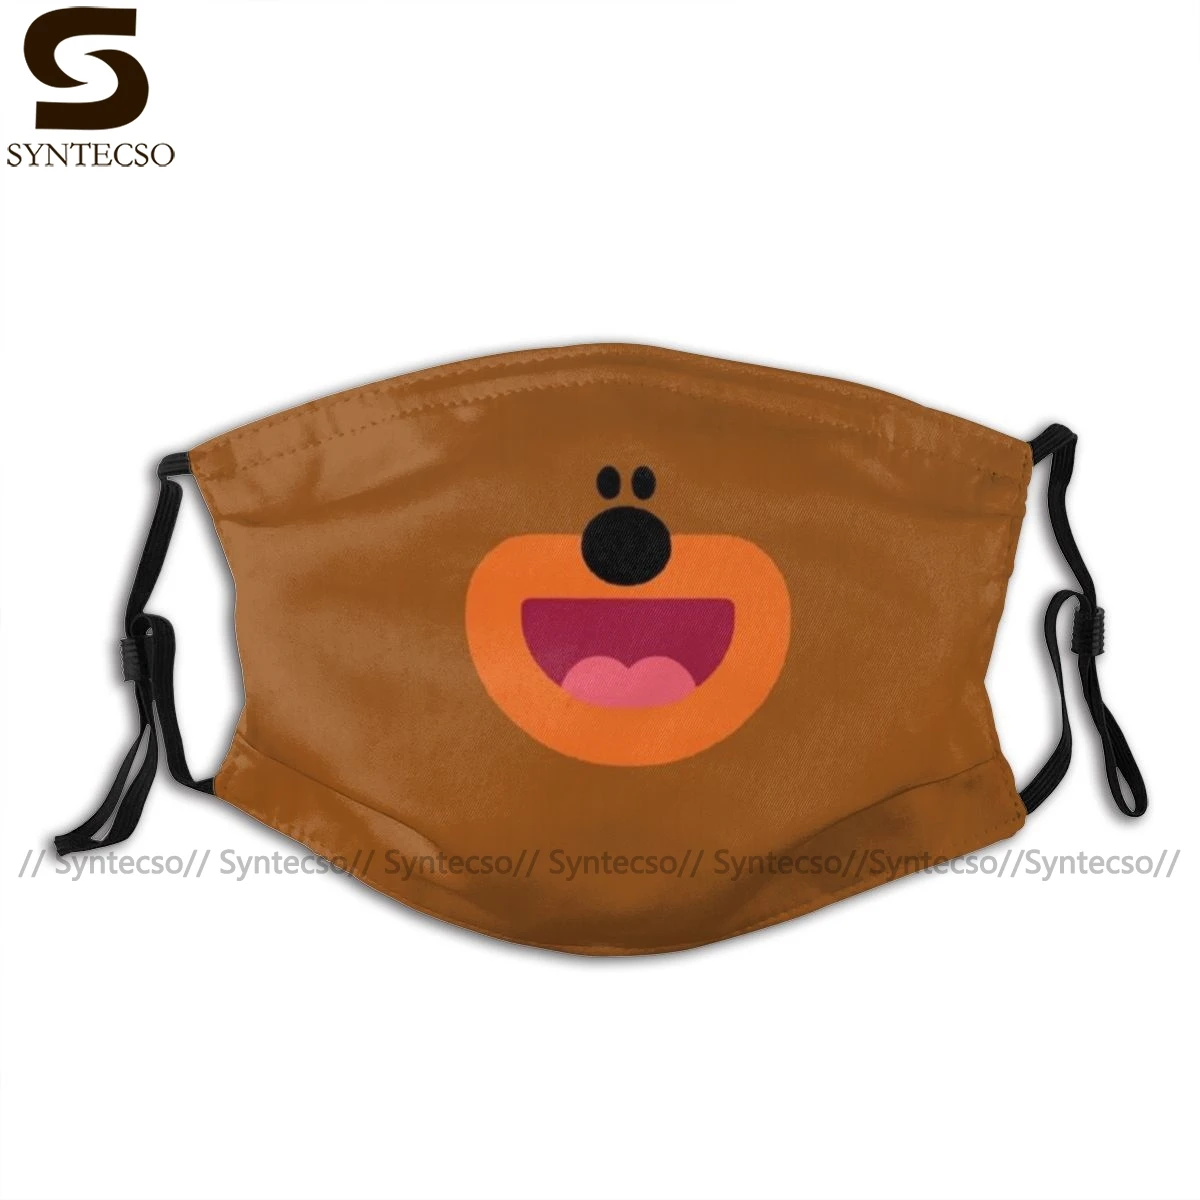 

Hey Duggee Mouth Face Mask Doggee Facial Mask Funny Kawai with 2 Filters for Adult